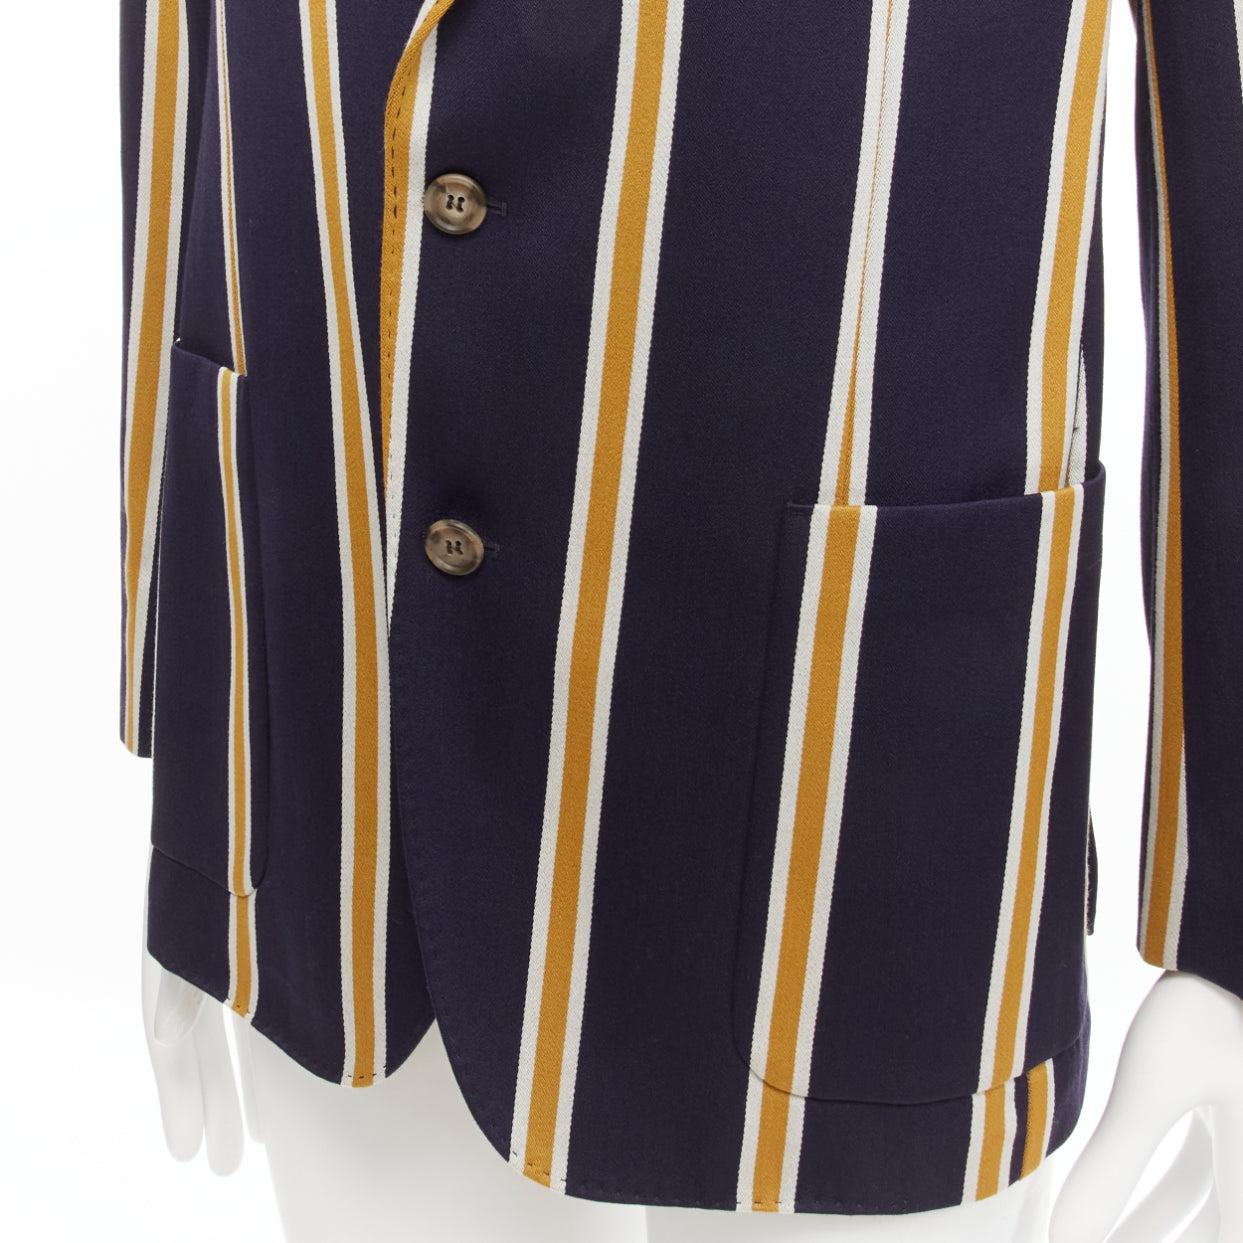 AMI yellow navy stripes wool cotton 3 pockets preppy schoolboy blazer IT50 L
Reference: JSLE/A00060
Brand: Ami
Material: Wool, Cotton
Color: Yellow, Navy
Pattern: Striped
Closure: Button
Extra Details: Double vent back.
Made in: